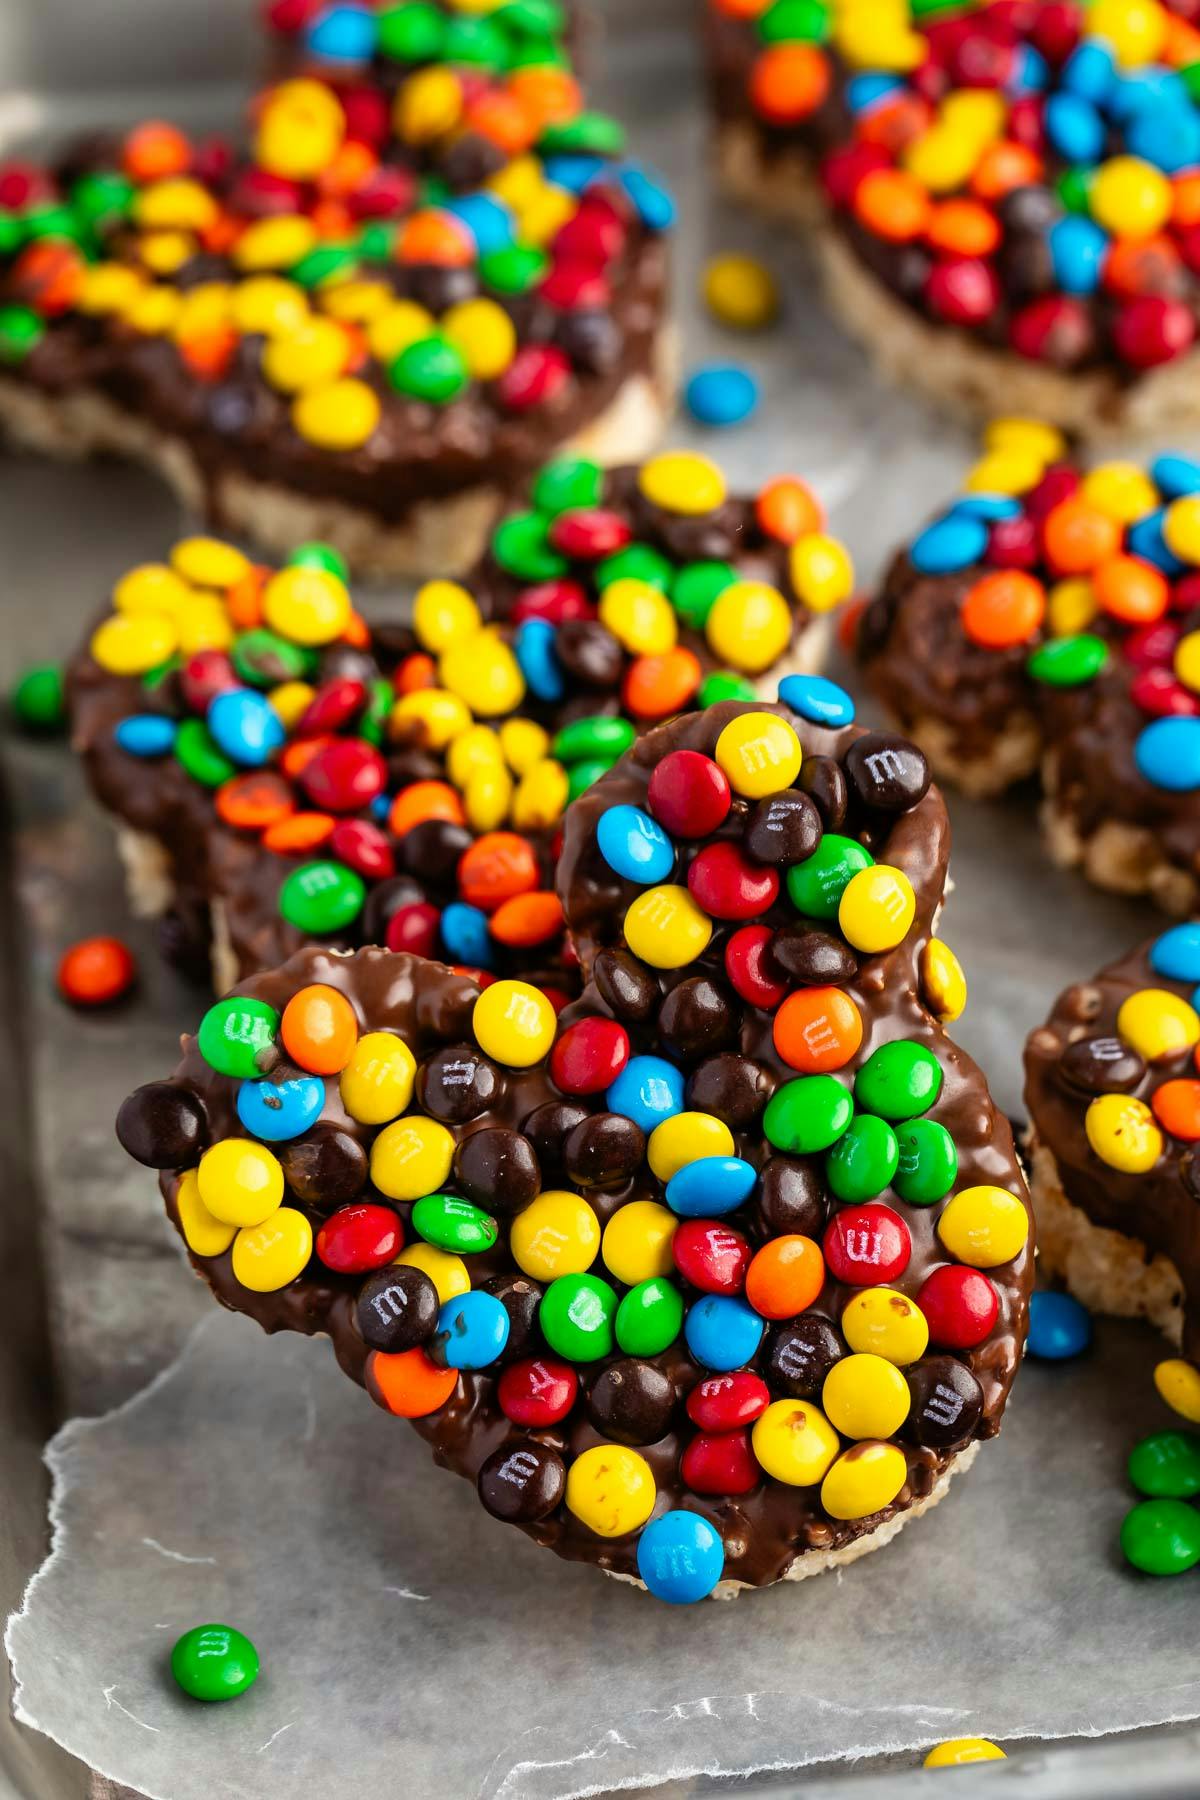 Rice Krispie treats shaped as mickeys with chocolate and colorful candy on top.